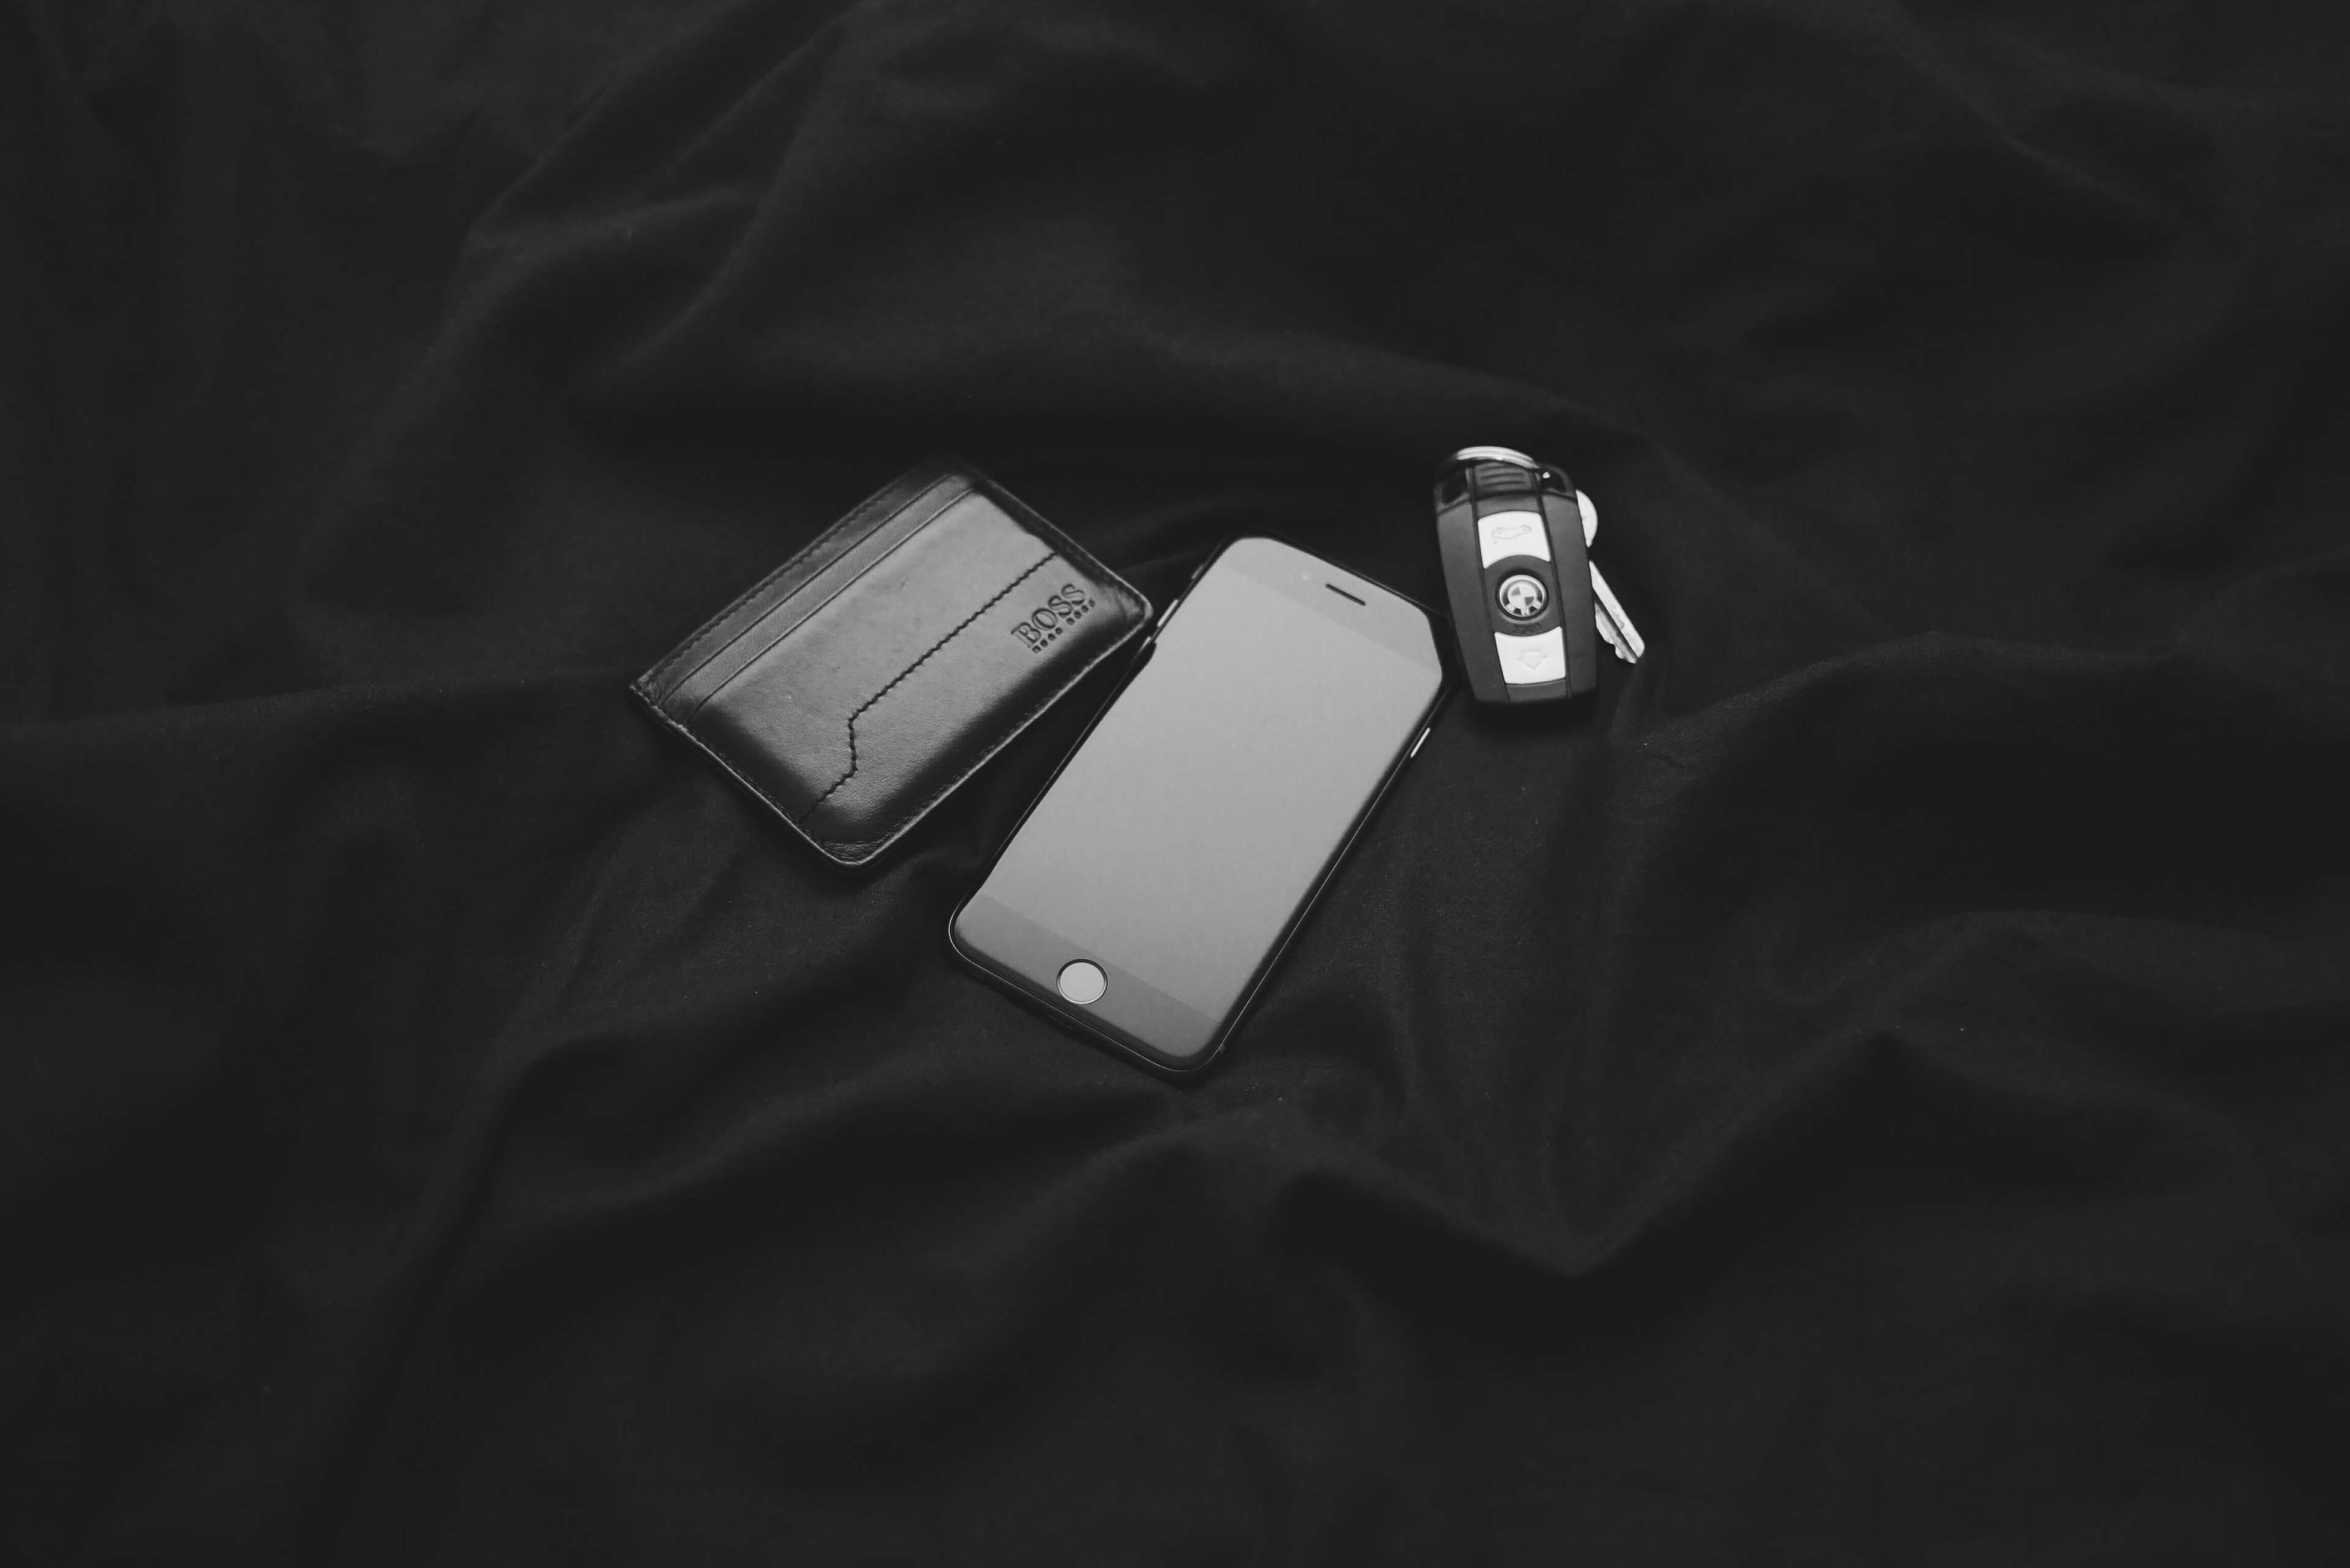 apple, black and white, bmw, iphone, keys, mobile phone, screen